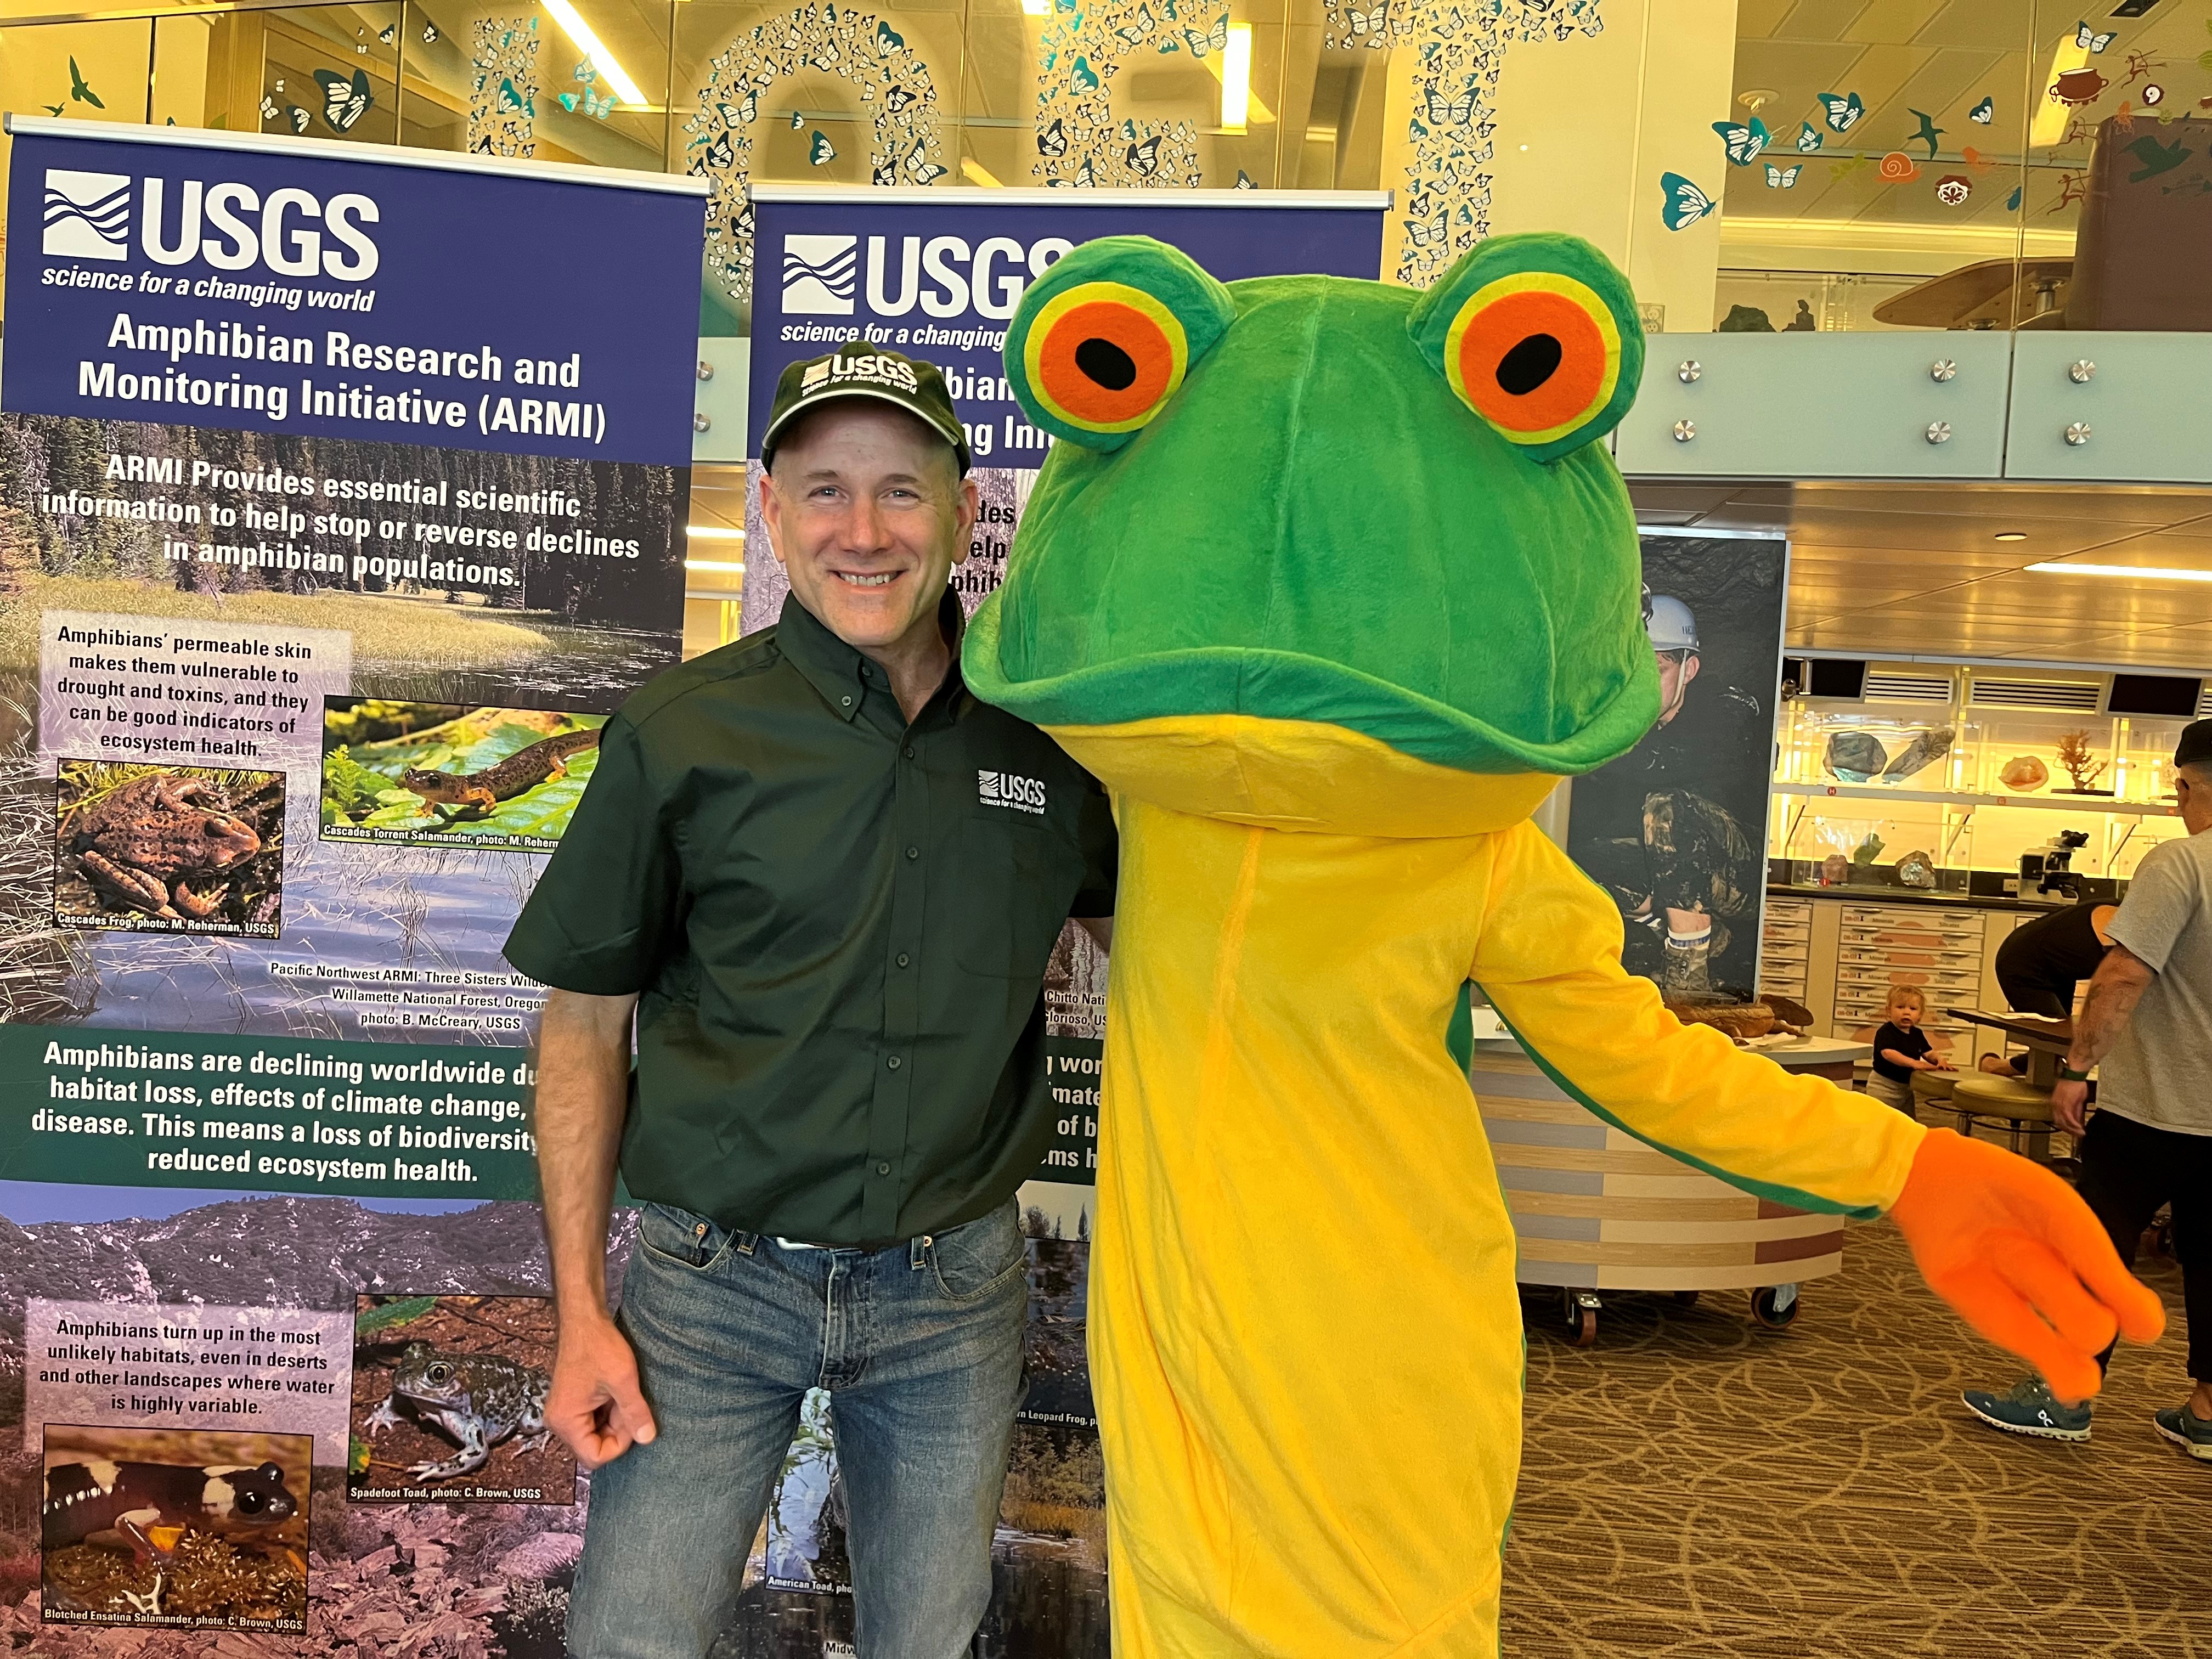 Mike Adams with Phil the Frog at the Smithsonian’s Natural History Museum